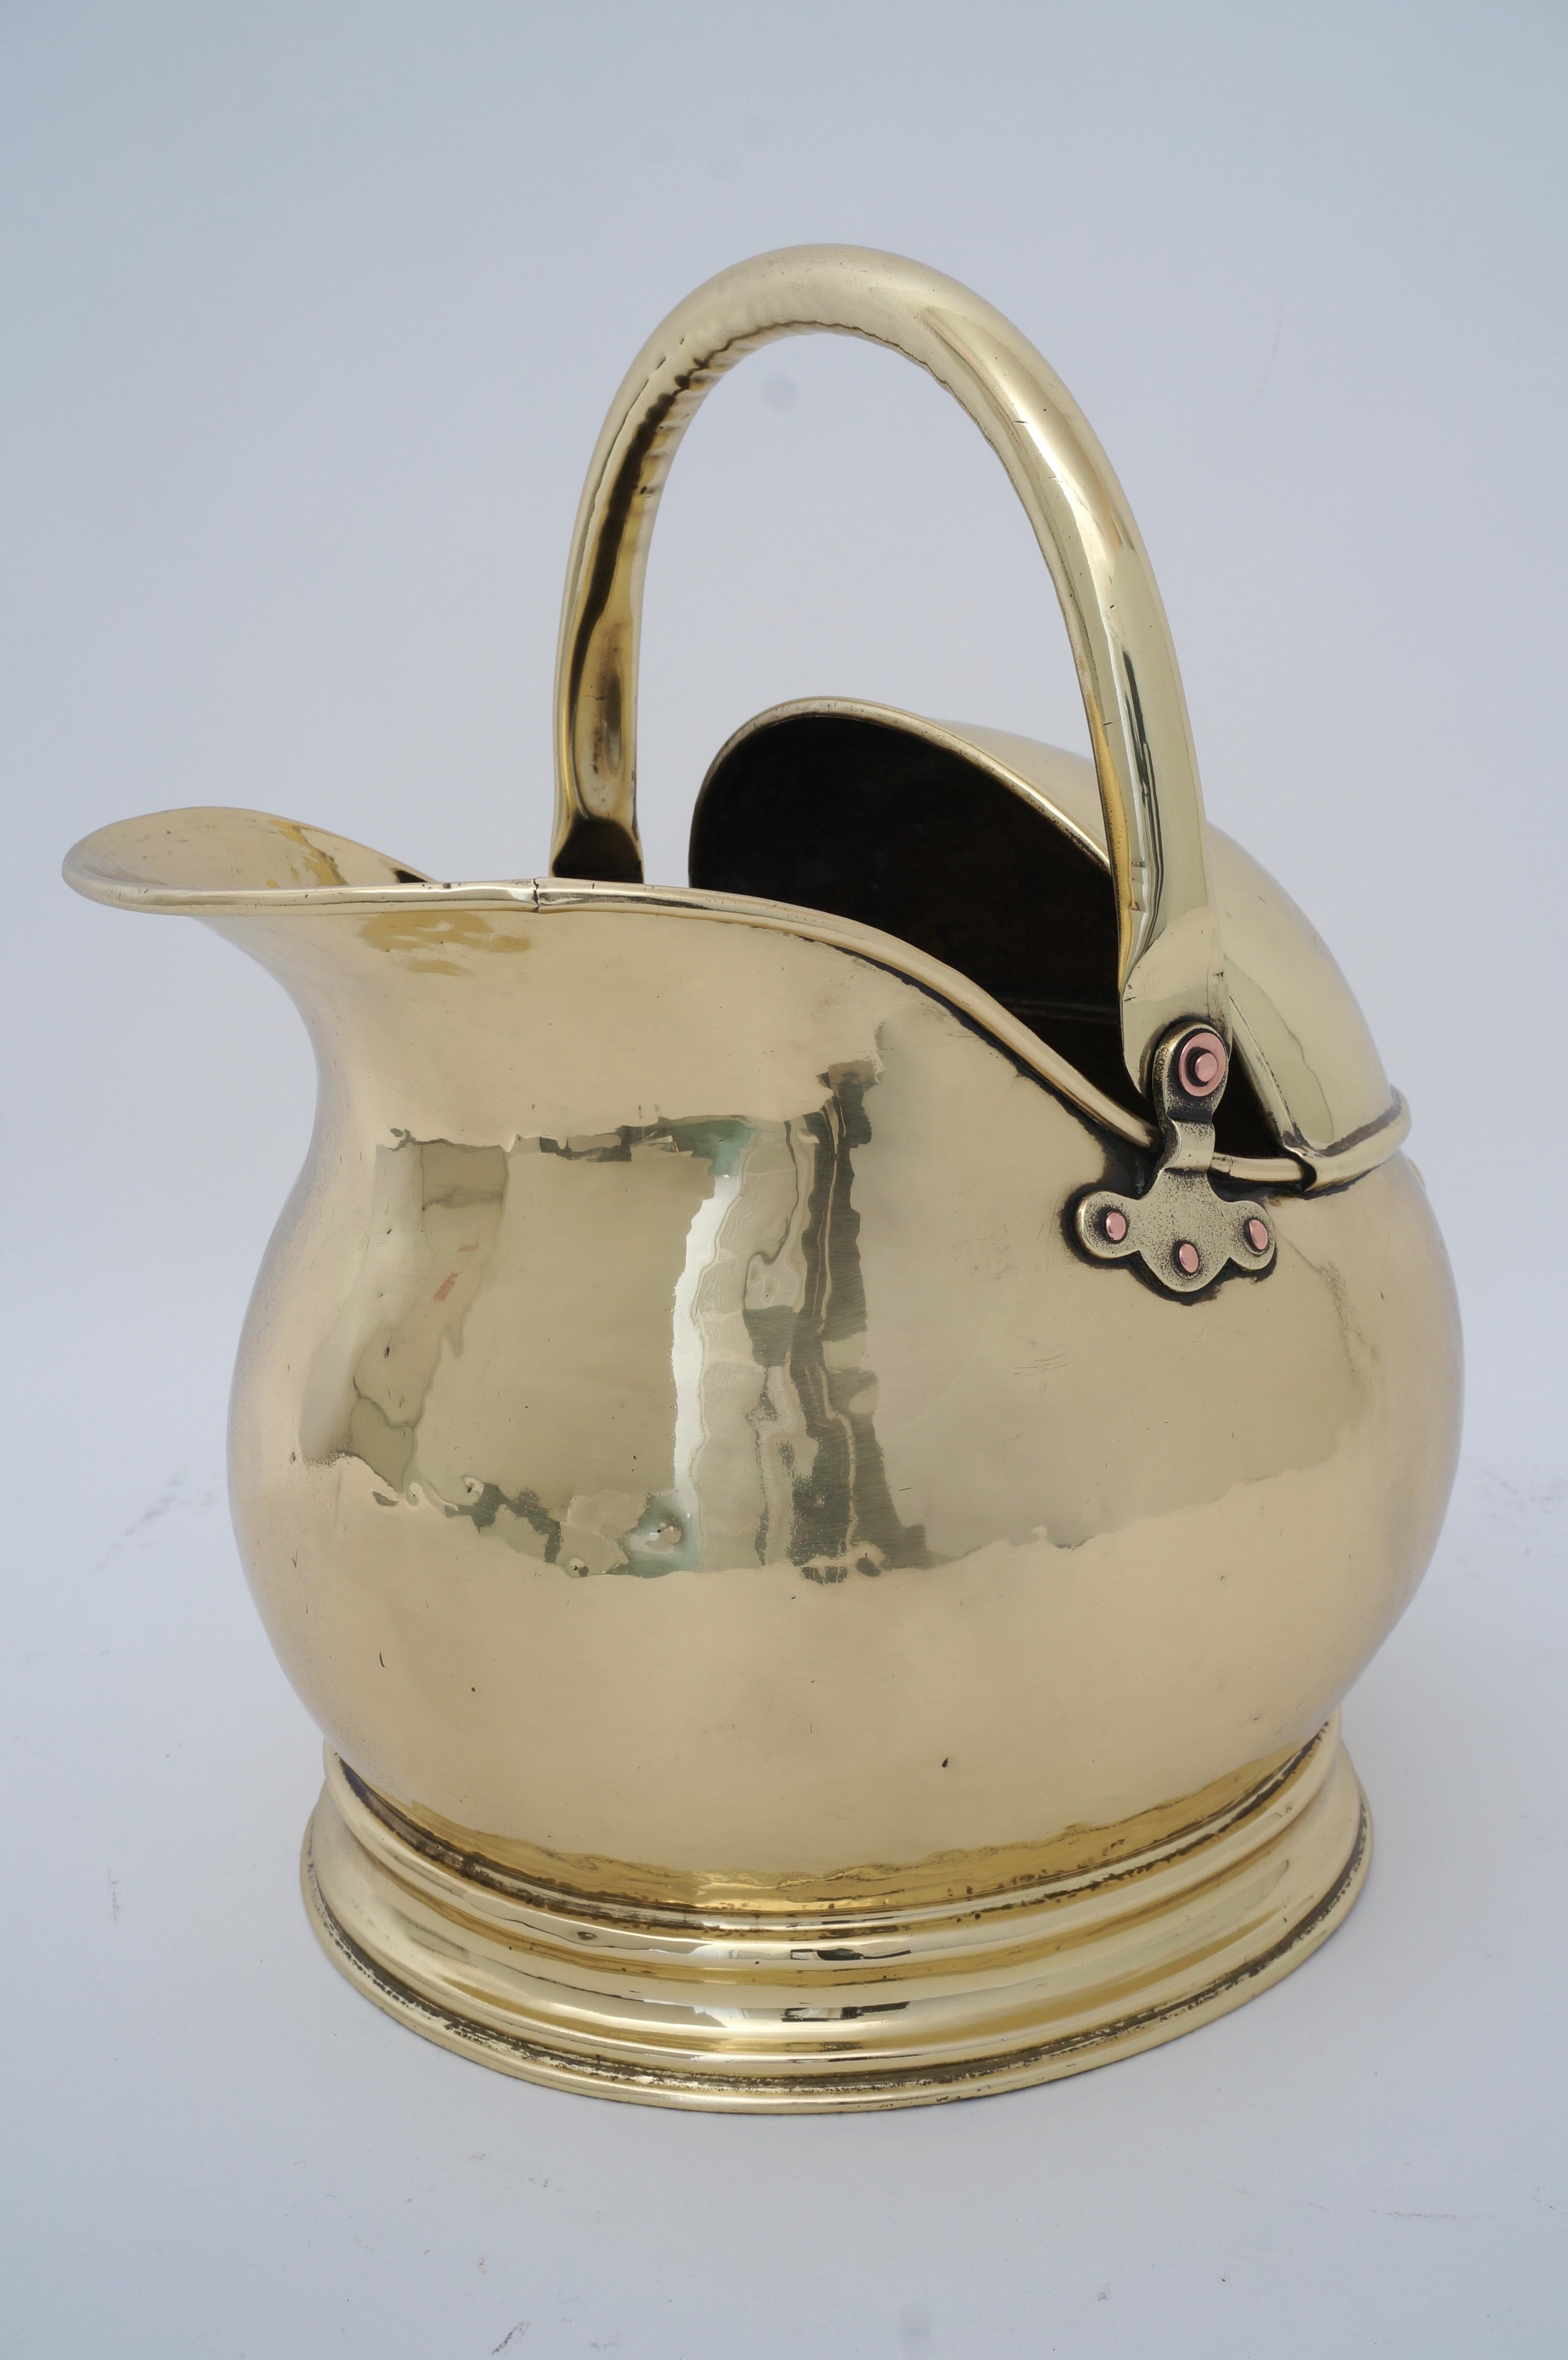 Antique Coal Scuttle polished brass for Firewood Holder from a Palm Beach estate. Has been professionally polished.

With handle down: measures 11 W x 14 D x 11 1/4 H
with handle raised, height rises to 14 1/2